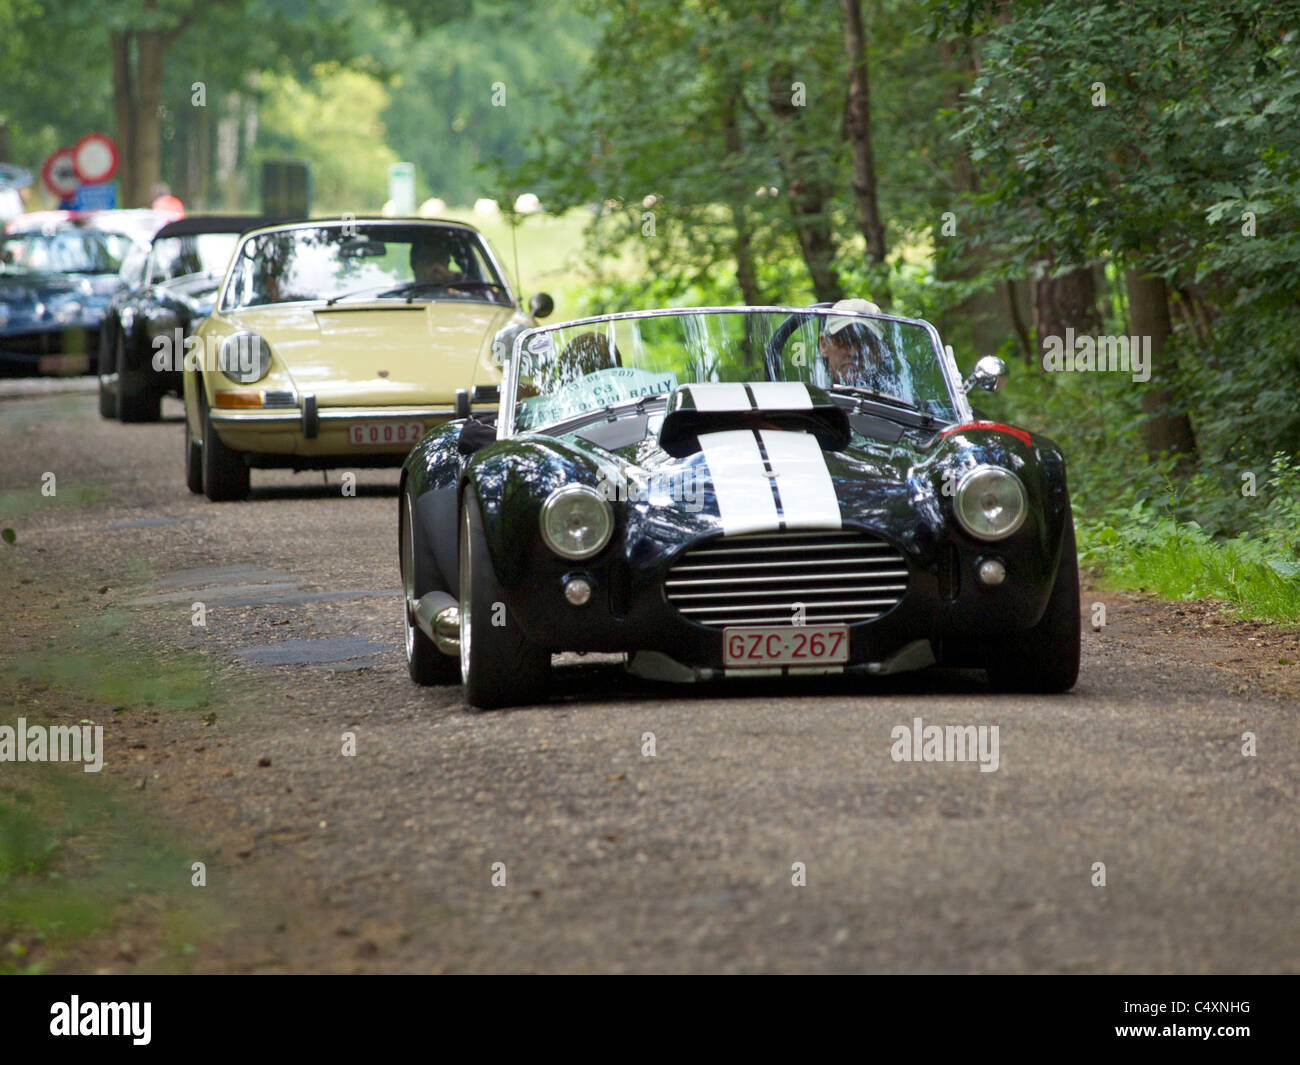 Classic car rallye in the Belgian countryside, AC Cobra 427 in front followed by Porsche 911. Stock Photo